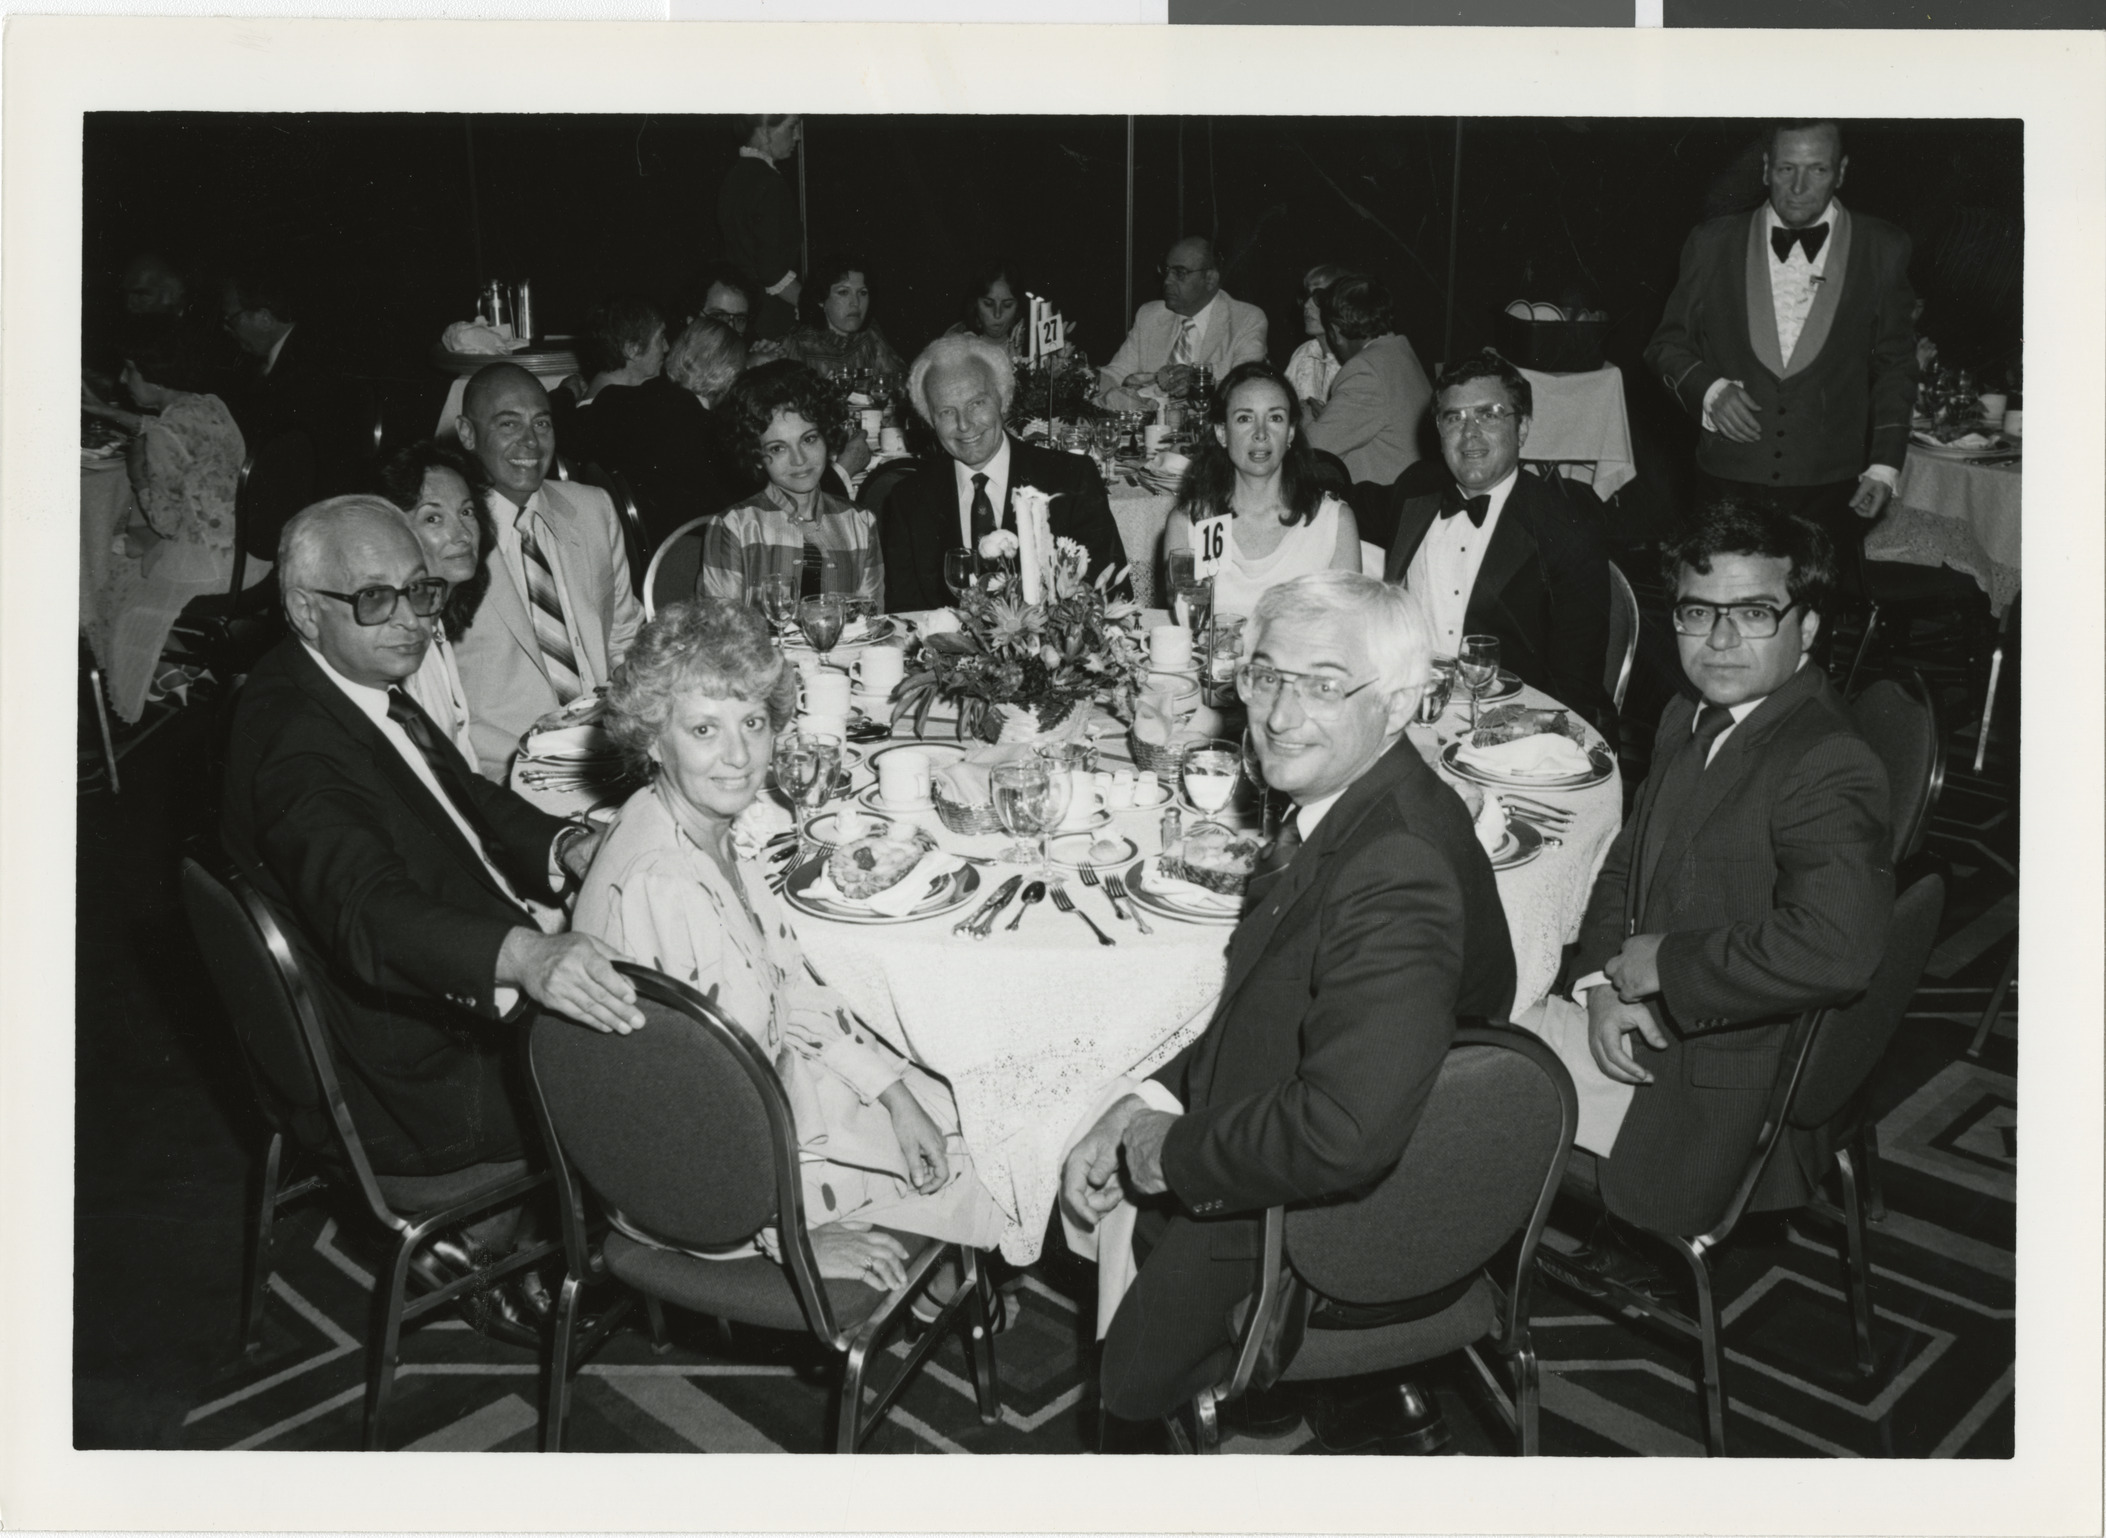 Photograph from Dorothy Eisenberg papers